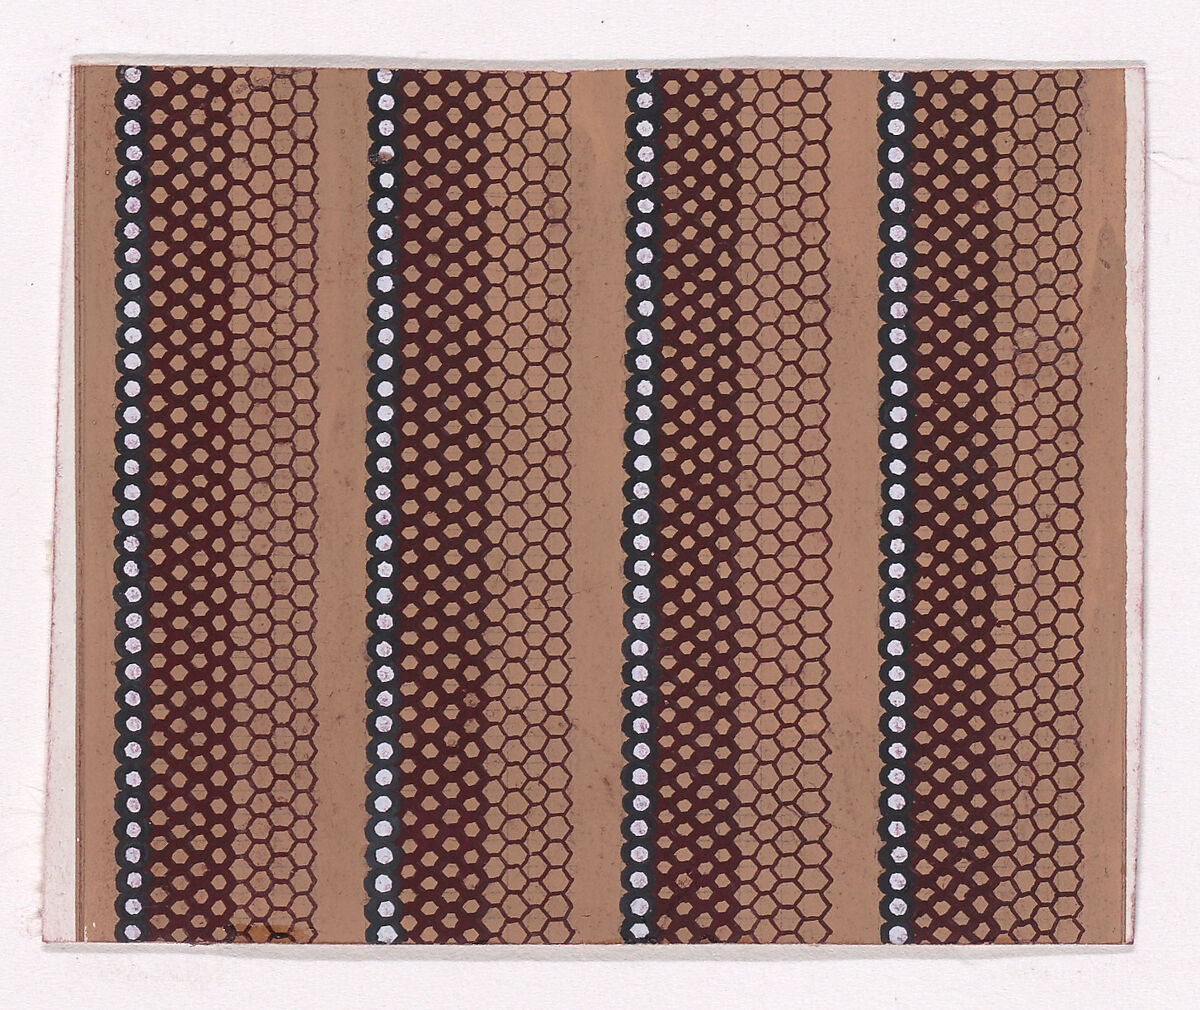 Textile Design with Vertical Stripes of Pearls and Honeycomb Pattern Over a Flat Ground, Anonymous, Alsatian, 19th century, Gouache 